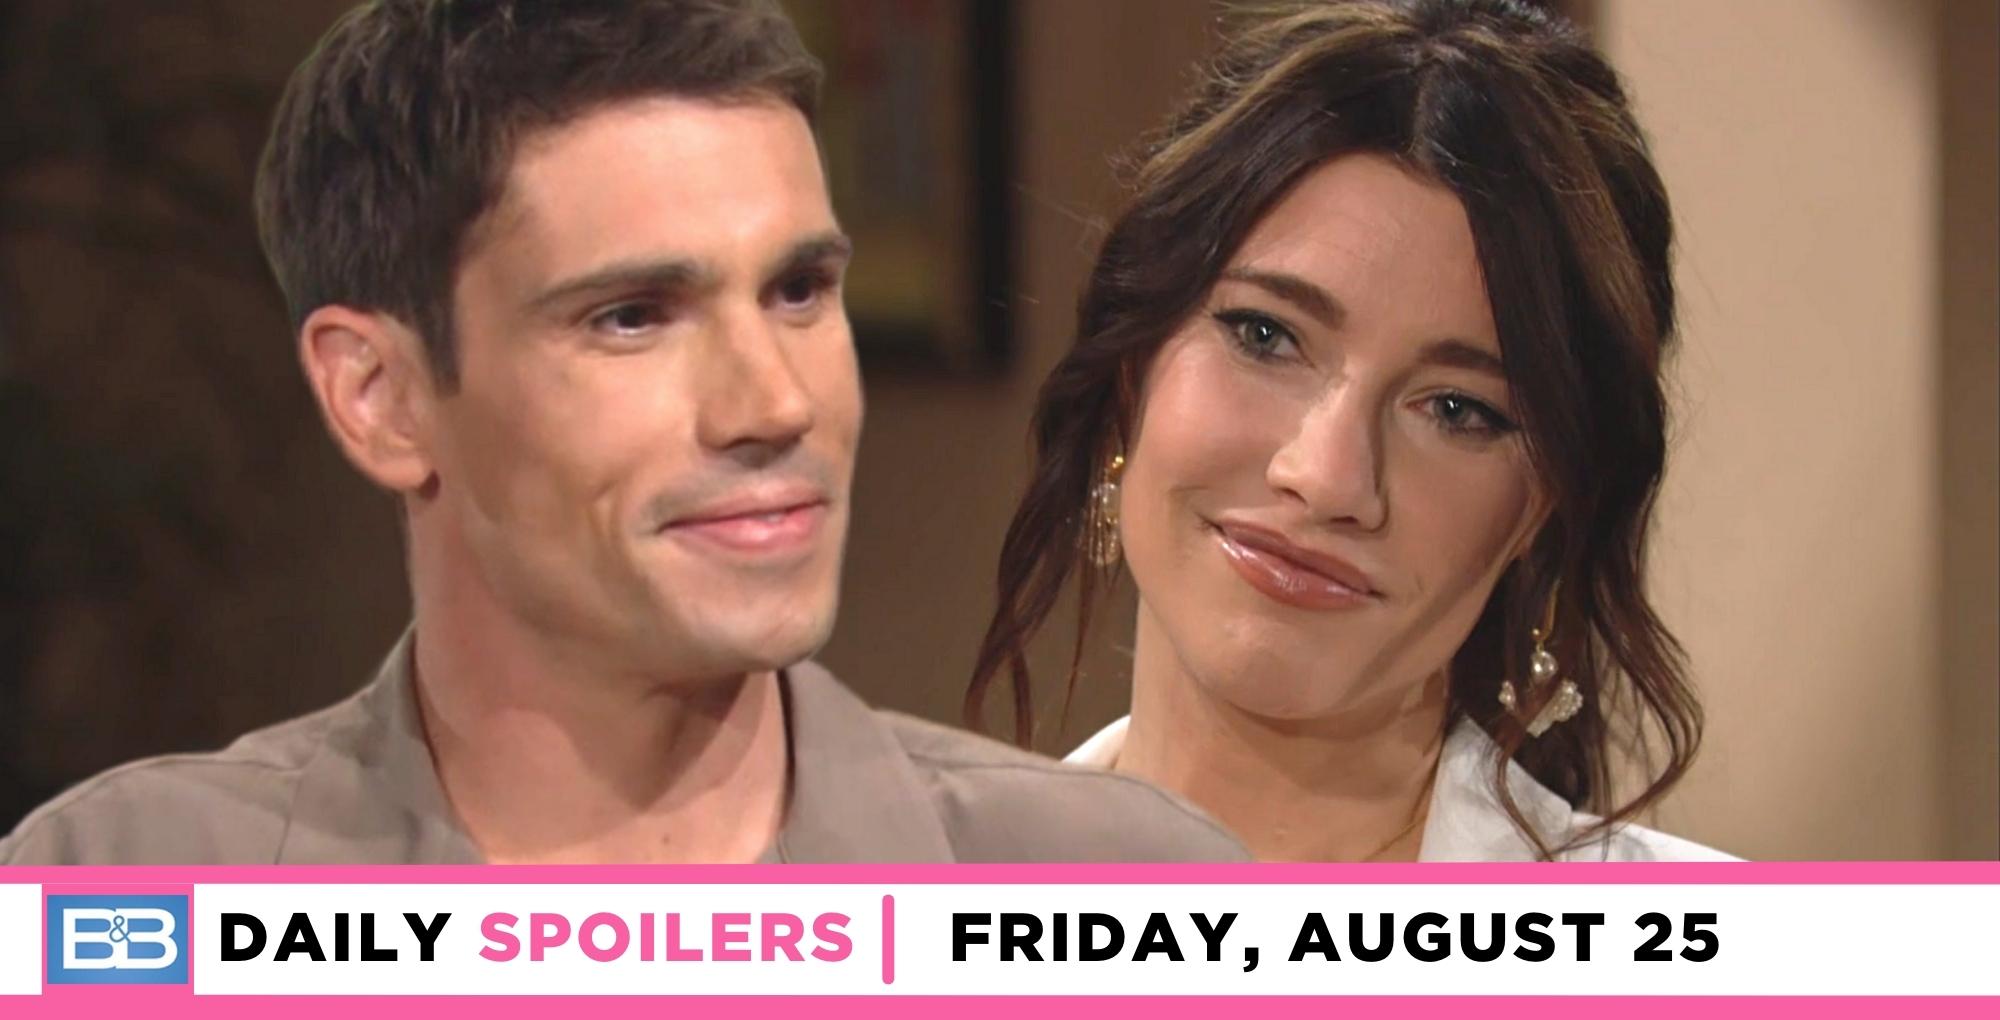 the bold and the beautiful spoilers for august 25, 2023, show finn and steffy looking lovingly at each other.